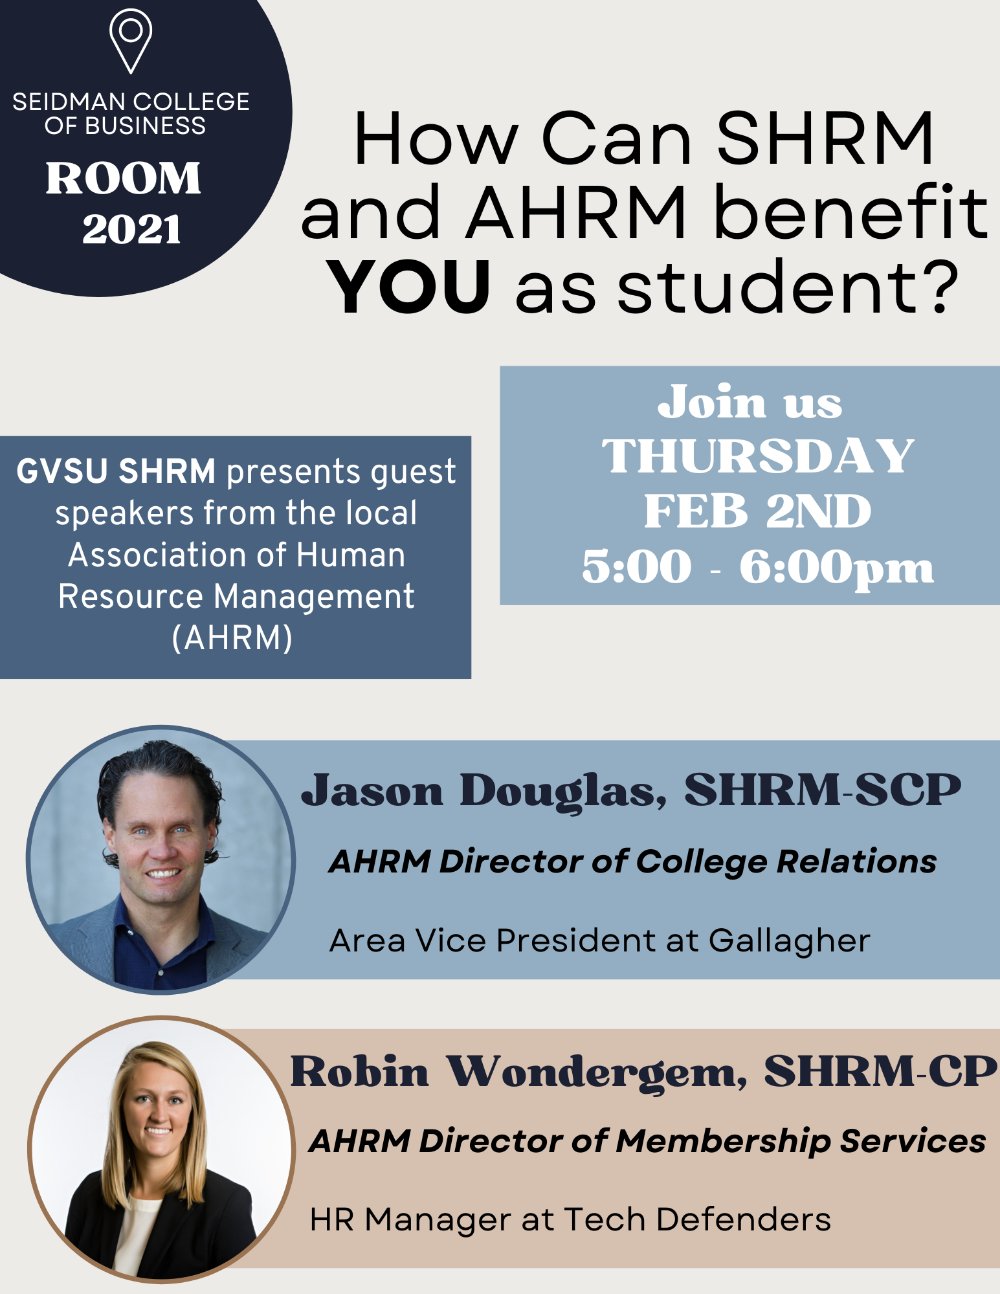 How Can SHRM and AHRM benefit YOU as a student?